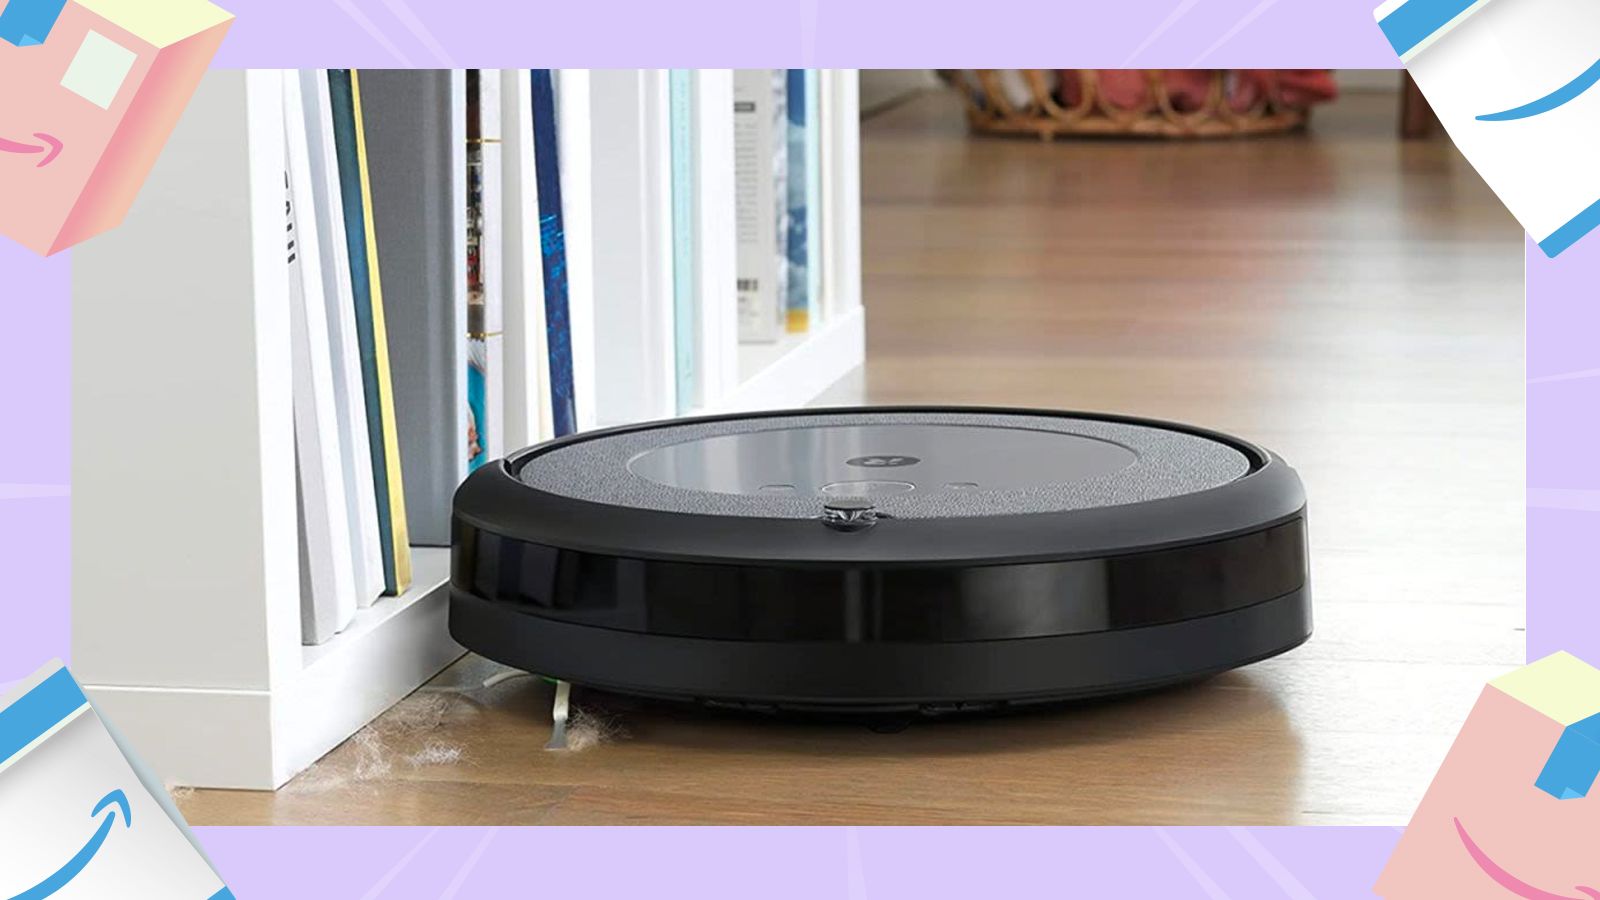 Roomba Amazon Prime Day Deal: Save on robot vacuums from Underscored